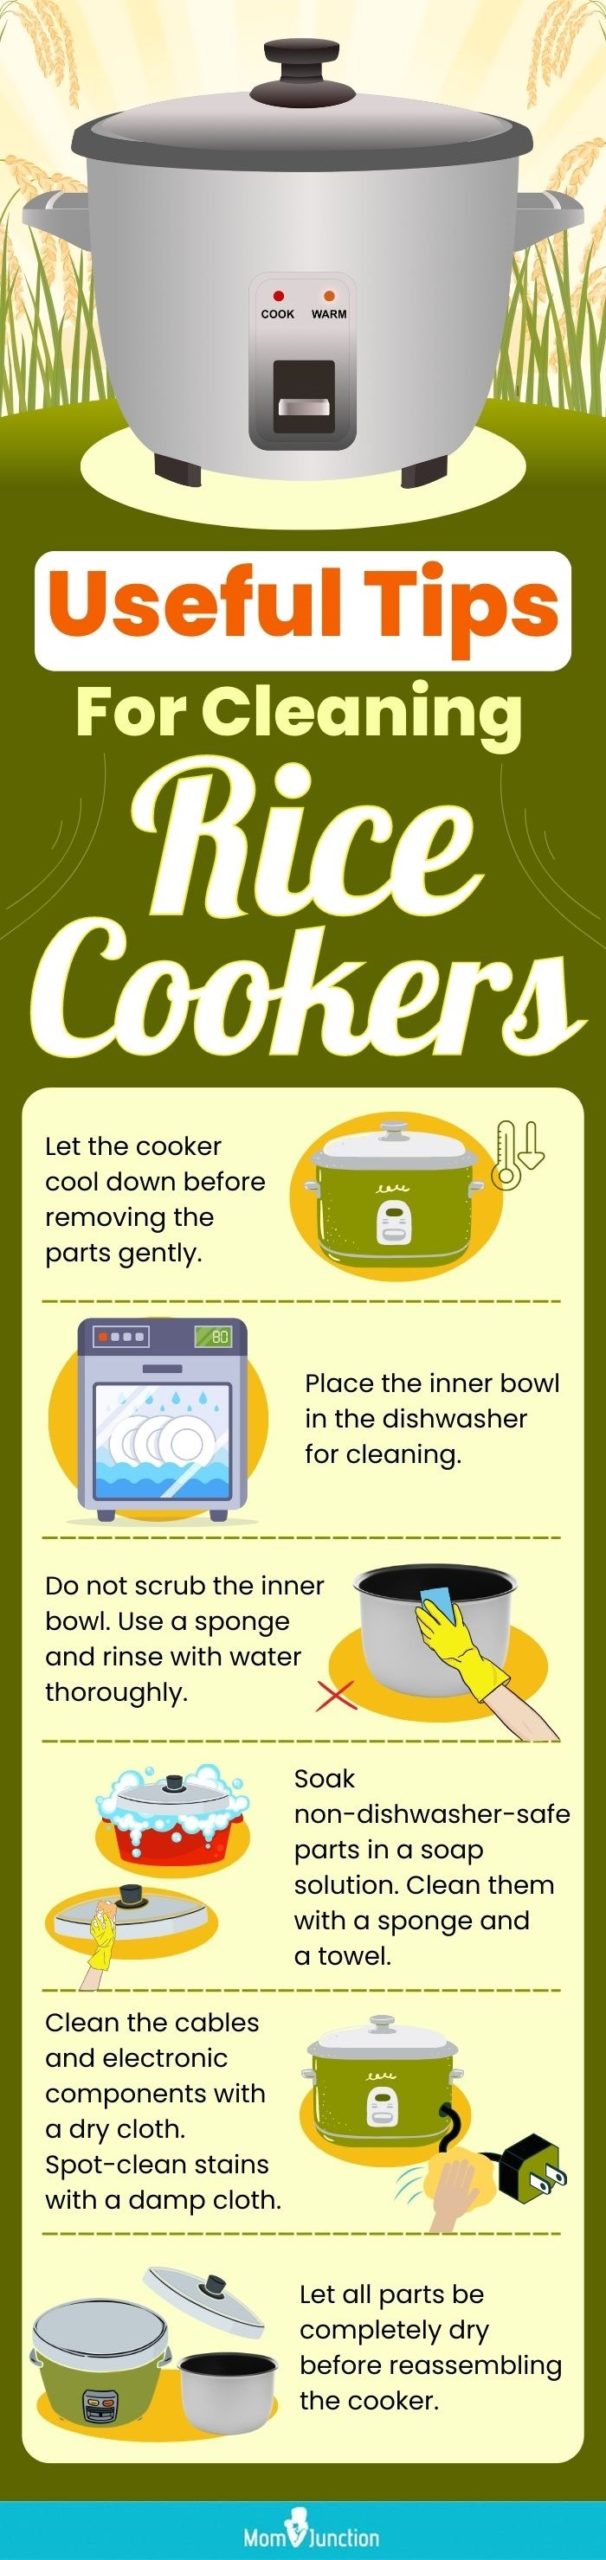 Useful Tips For Cleaning Rice Cookers (infographic)